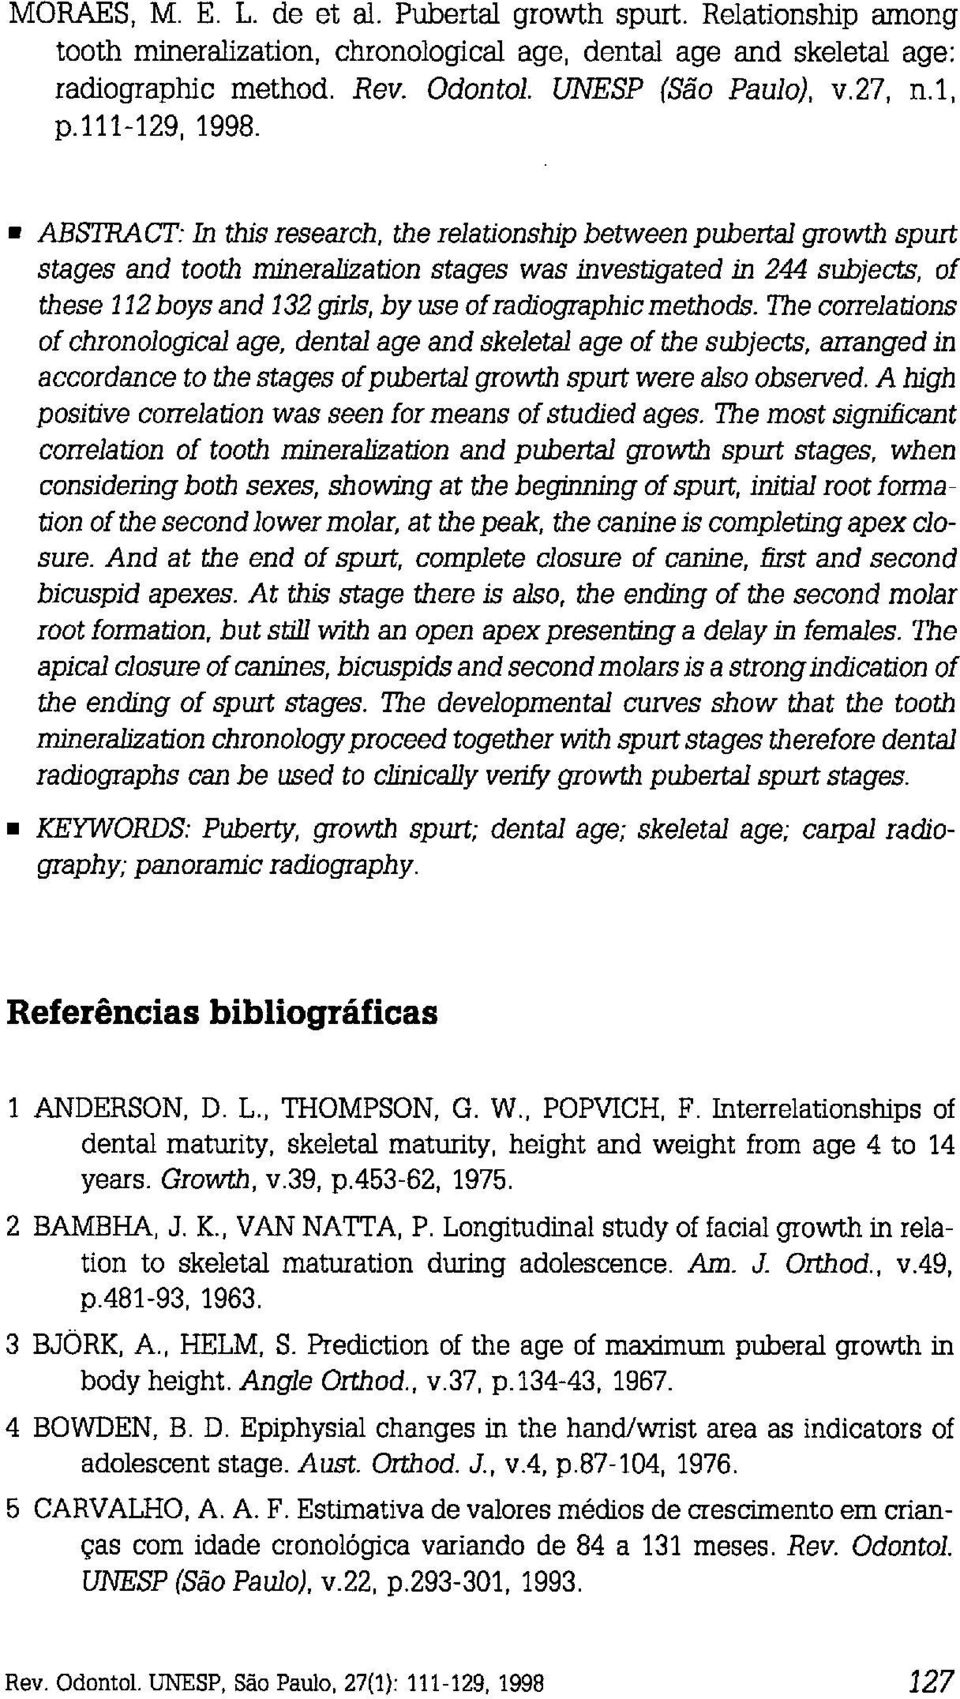 ABSTRAm: in üus research, the relationship between pubertal growth spurt stages and tooth mineralization stages was investigated in 244 subjects, of these 1 12 boys and 132 guls, by use of